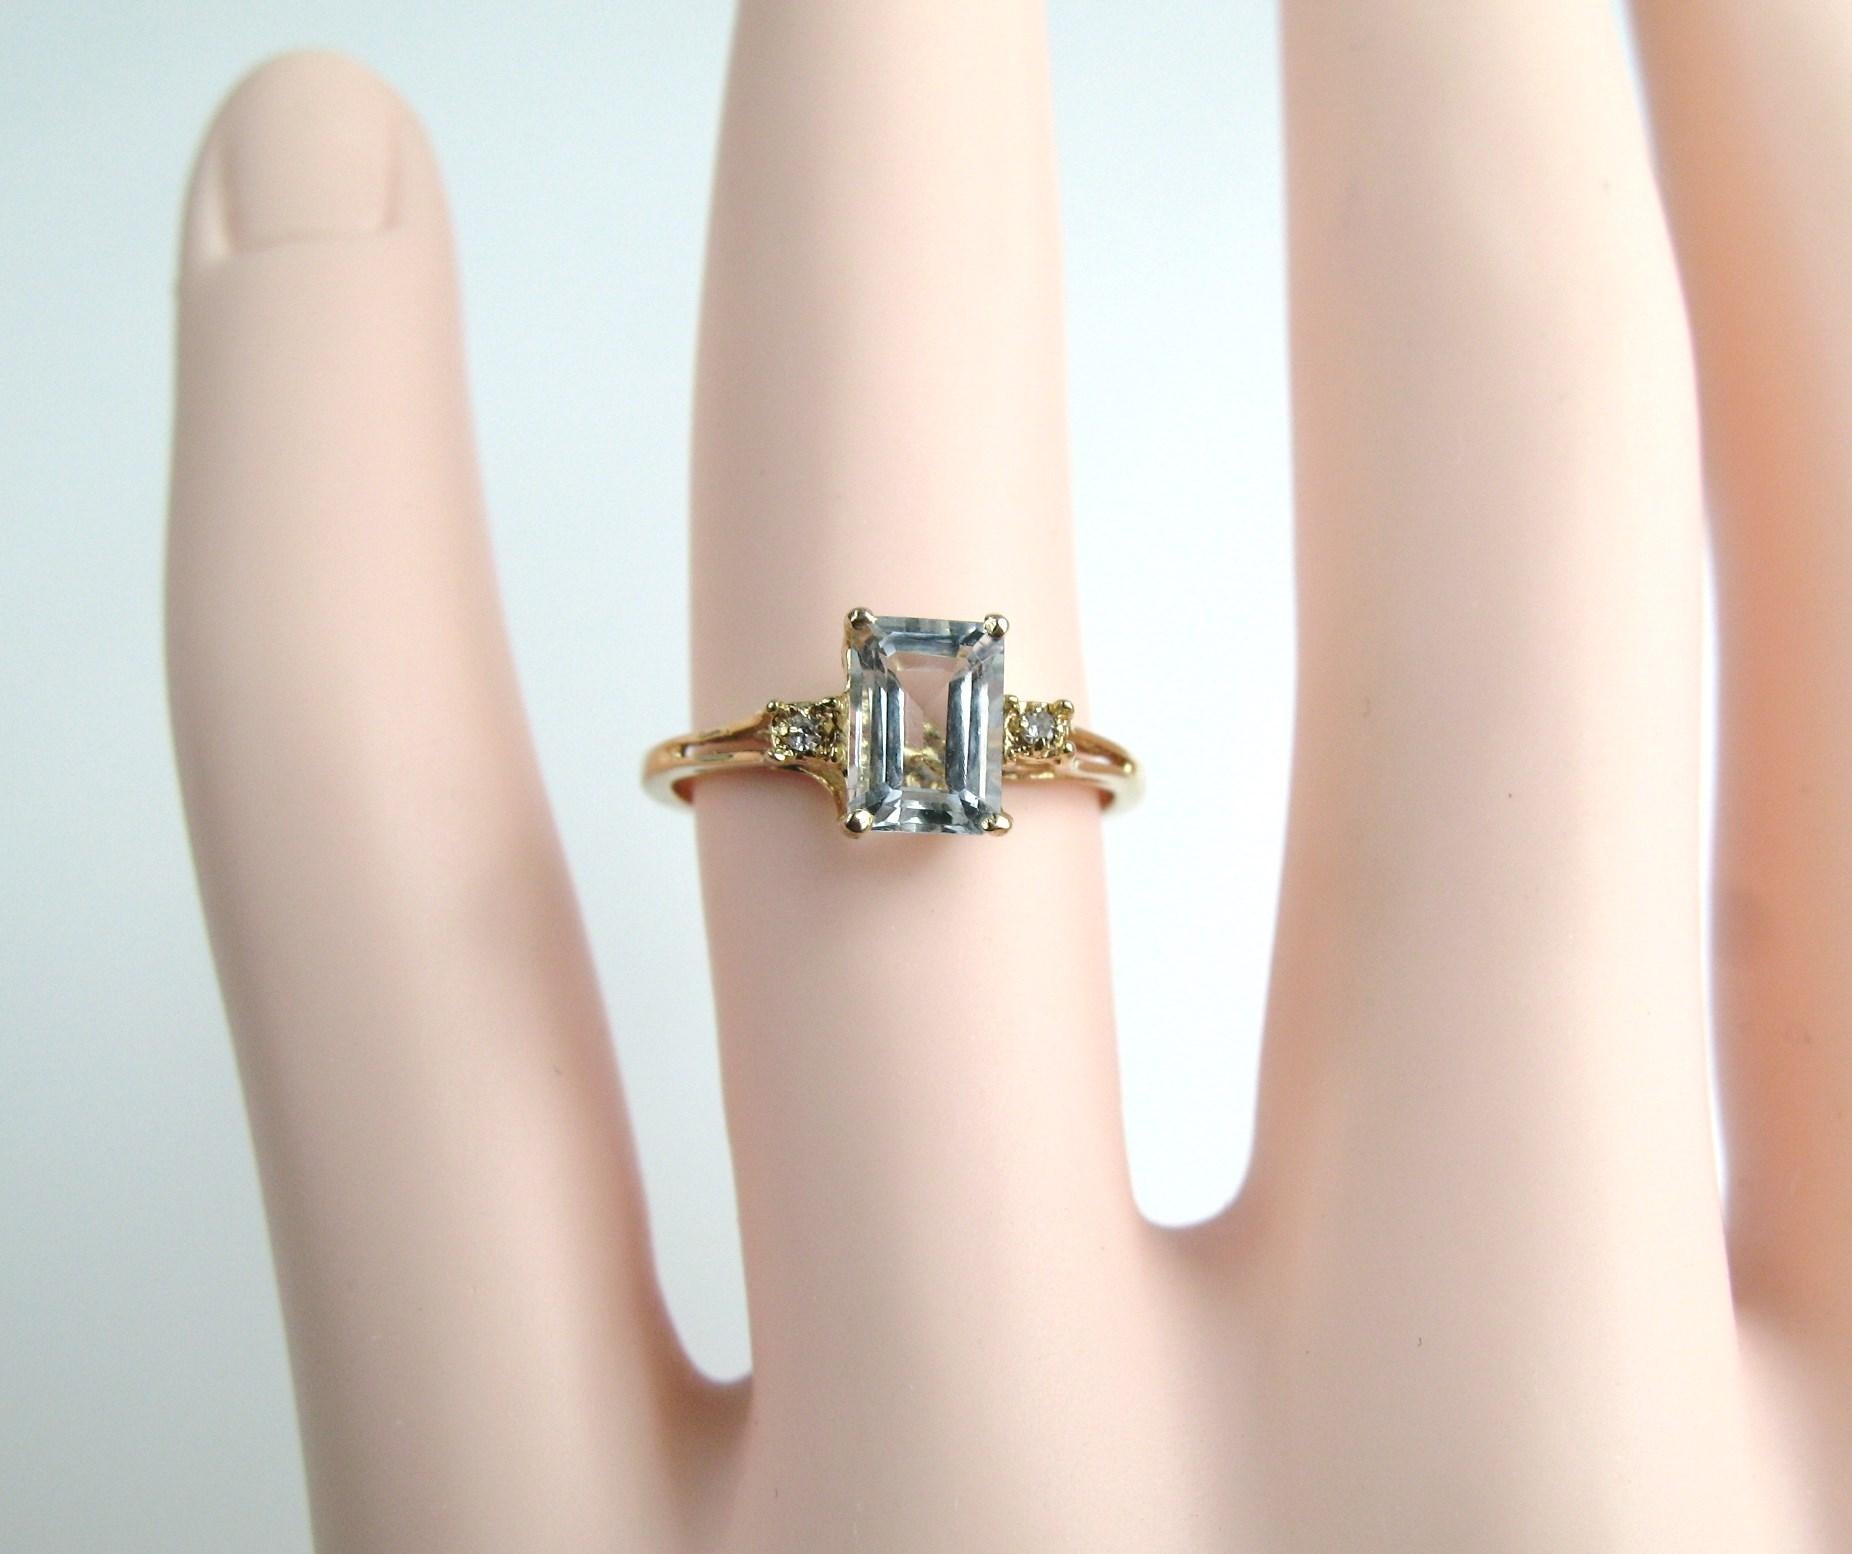 Sleek Modern Aquamarine & Diamond Ring. Prong-set Aquamarine Emerald-cut stone flanked by 1 Diamond on each side. The ring is a size a 6 and can be sized by us or your jeweler. Be sure to check our storefront for more fabulous pieces from this